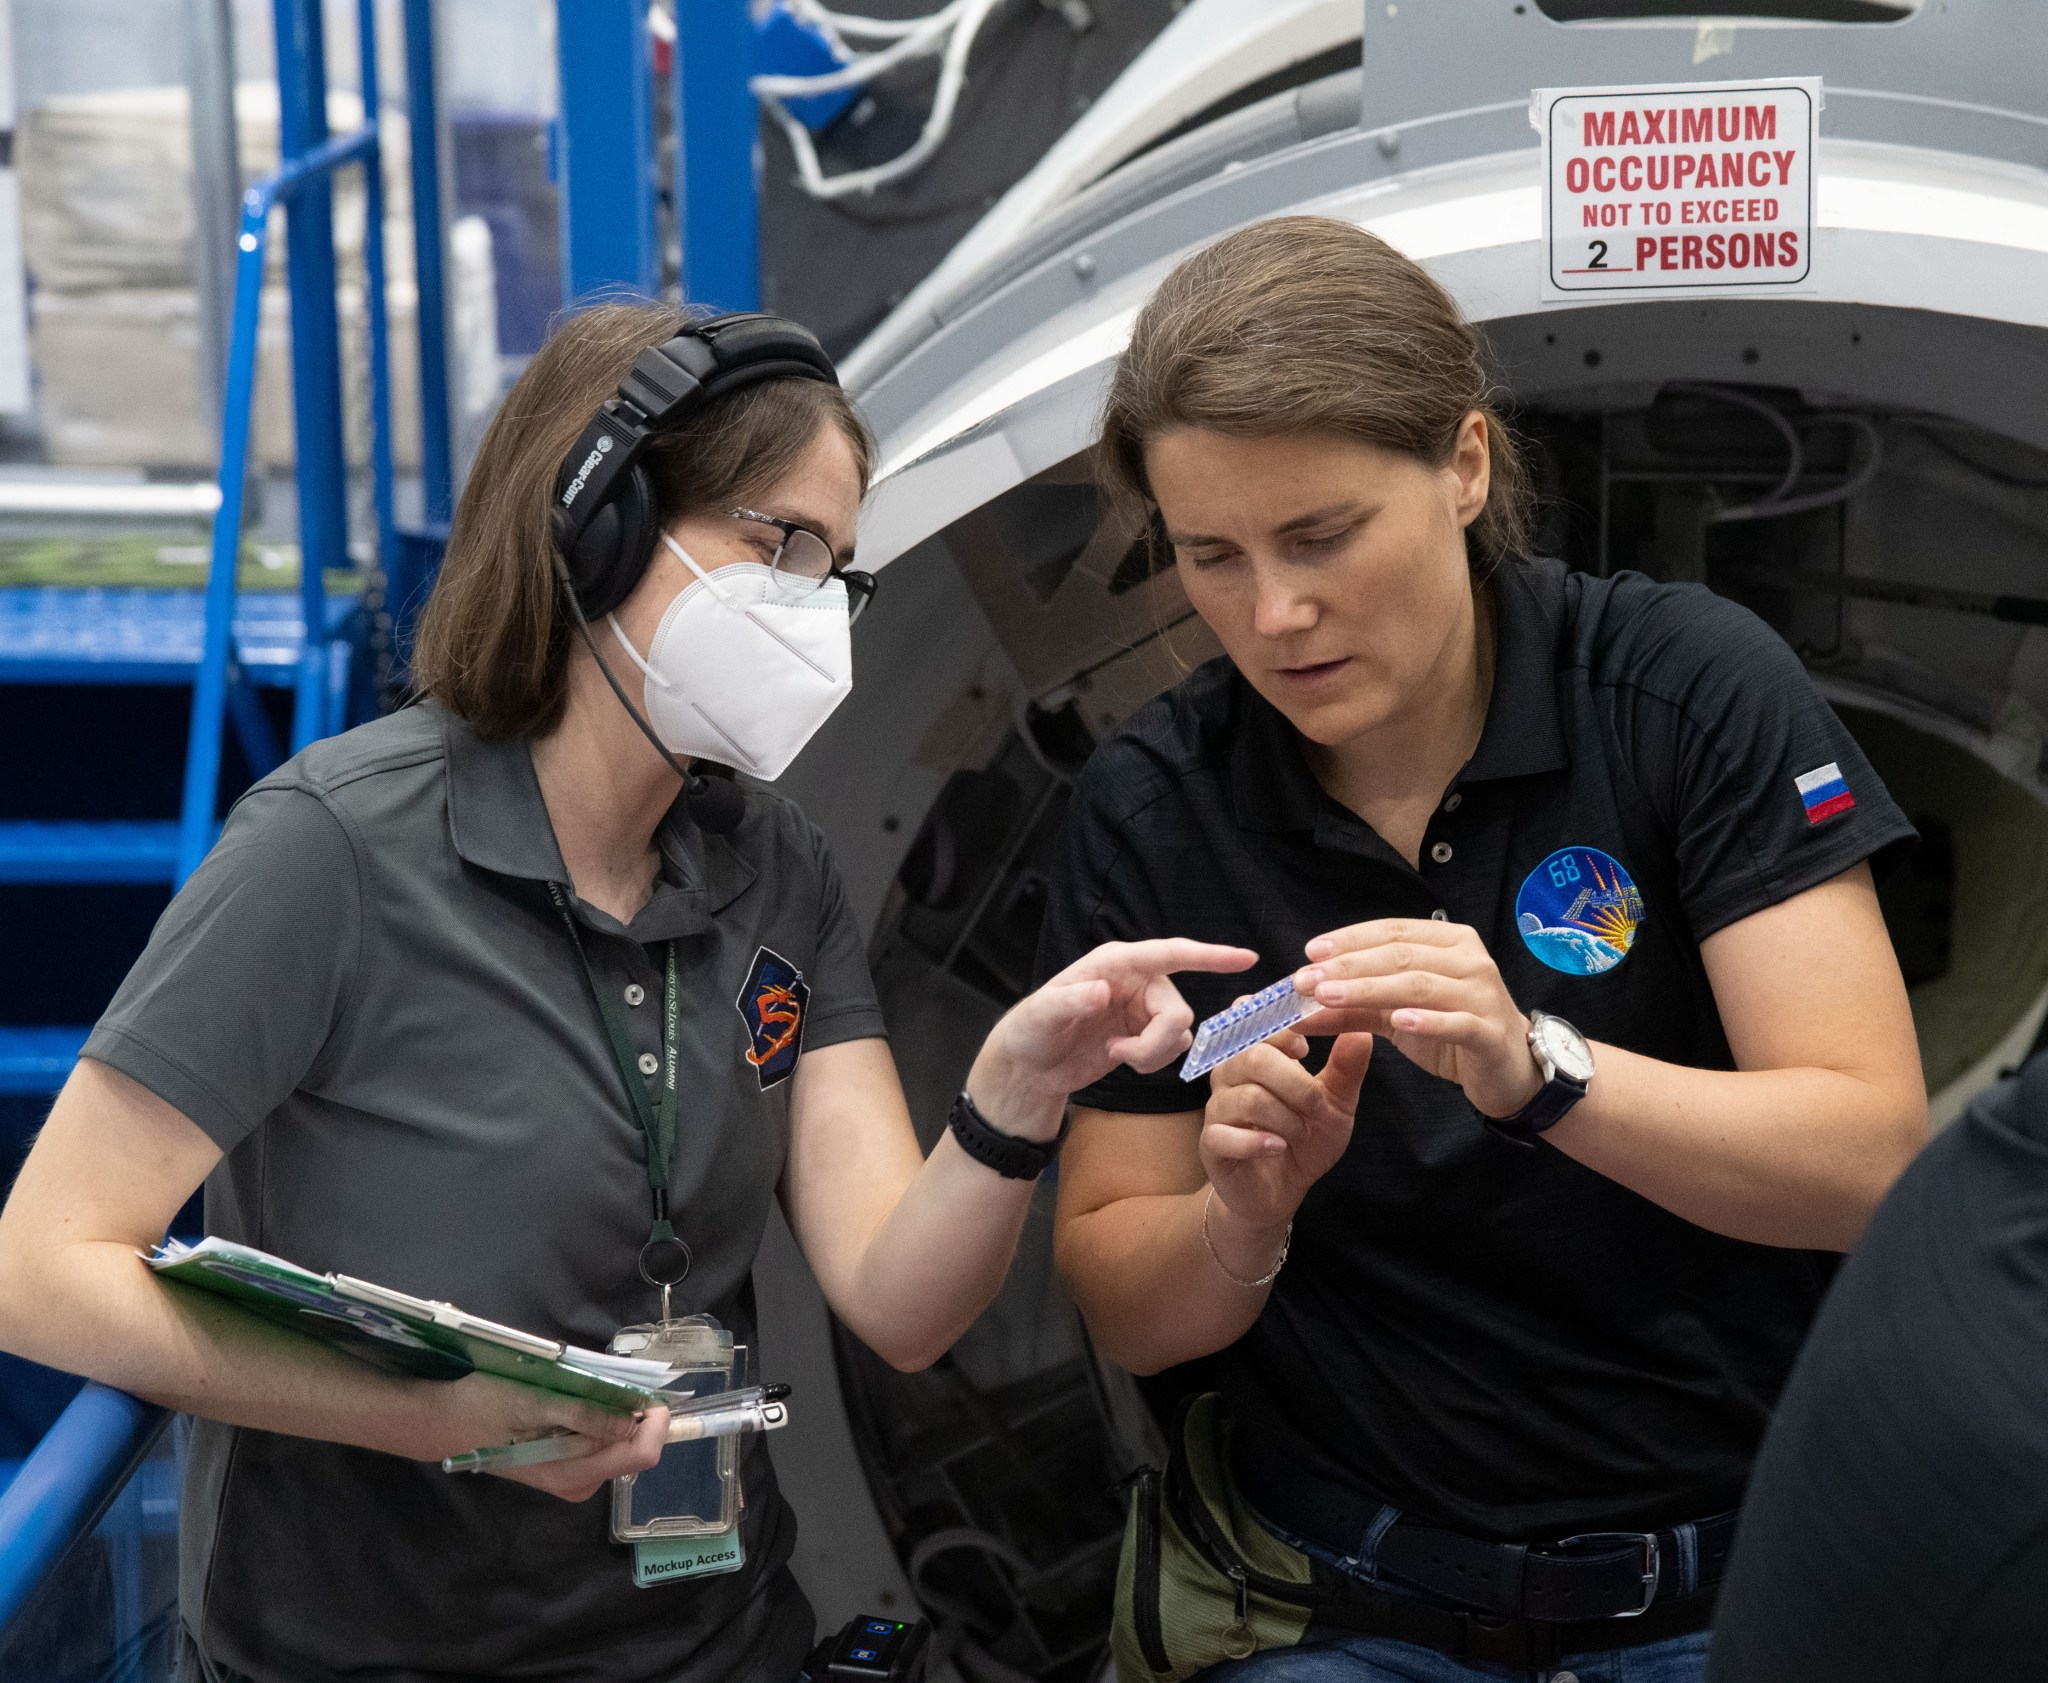 Two people are working together in a facility. The person on the left is wearing a headset, glasses, a face mask, and a gray polo shirt with a logo, and they are holding a clipboard. The person on the right is wearing a black polo shirt with mission patches, including one with a Russian flag, and they are holding a small piece of equipment.